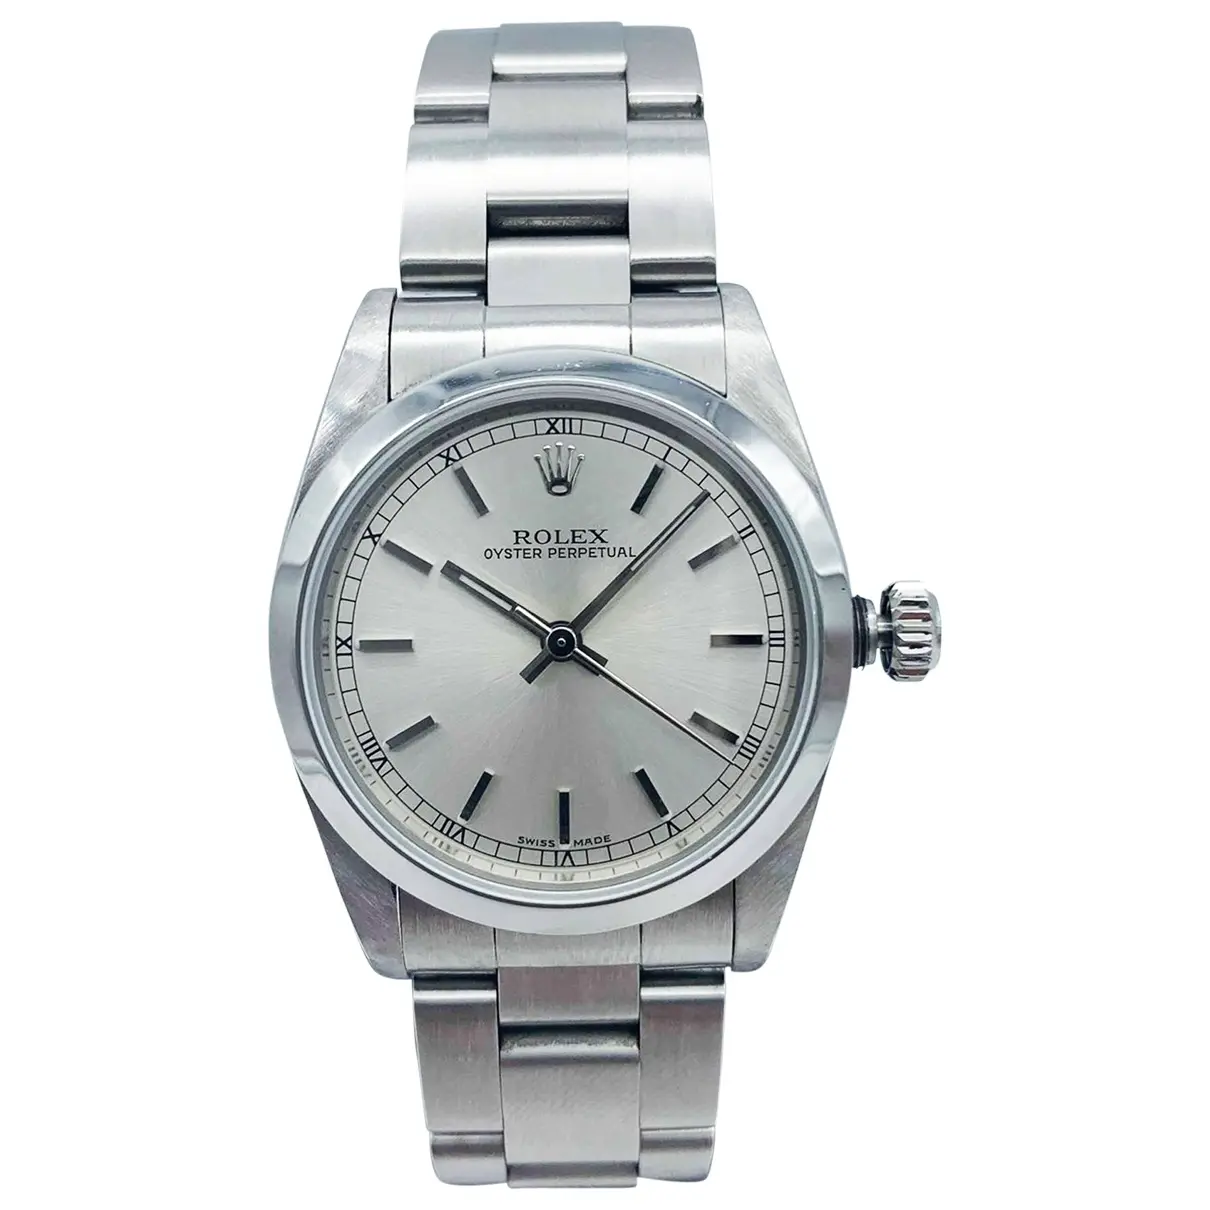 Oyster Perpetual 31mm watch Rolex - Vintage